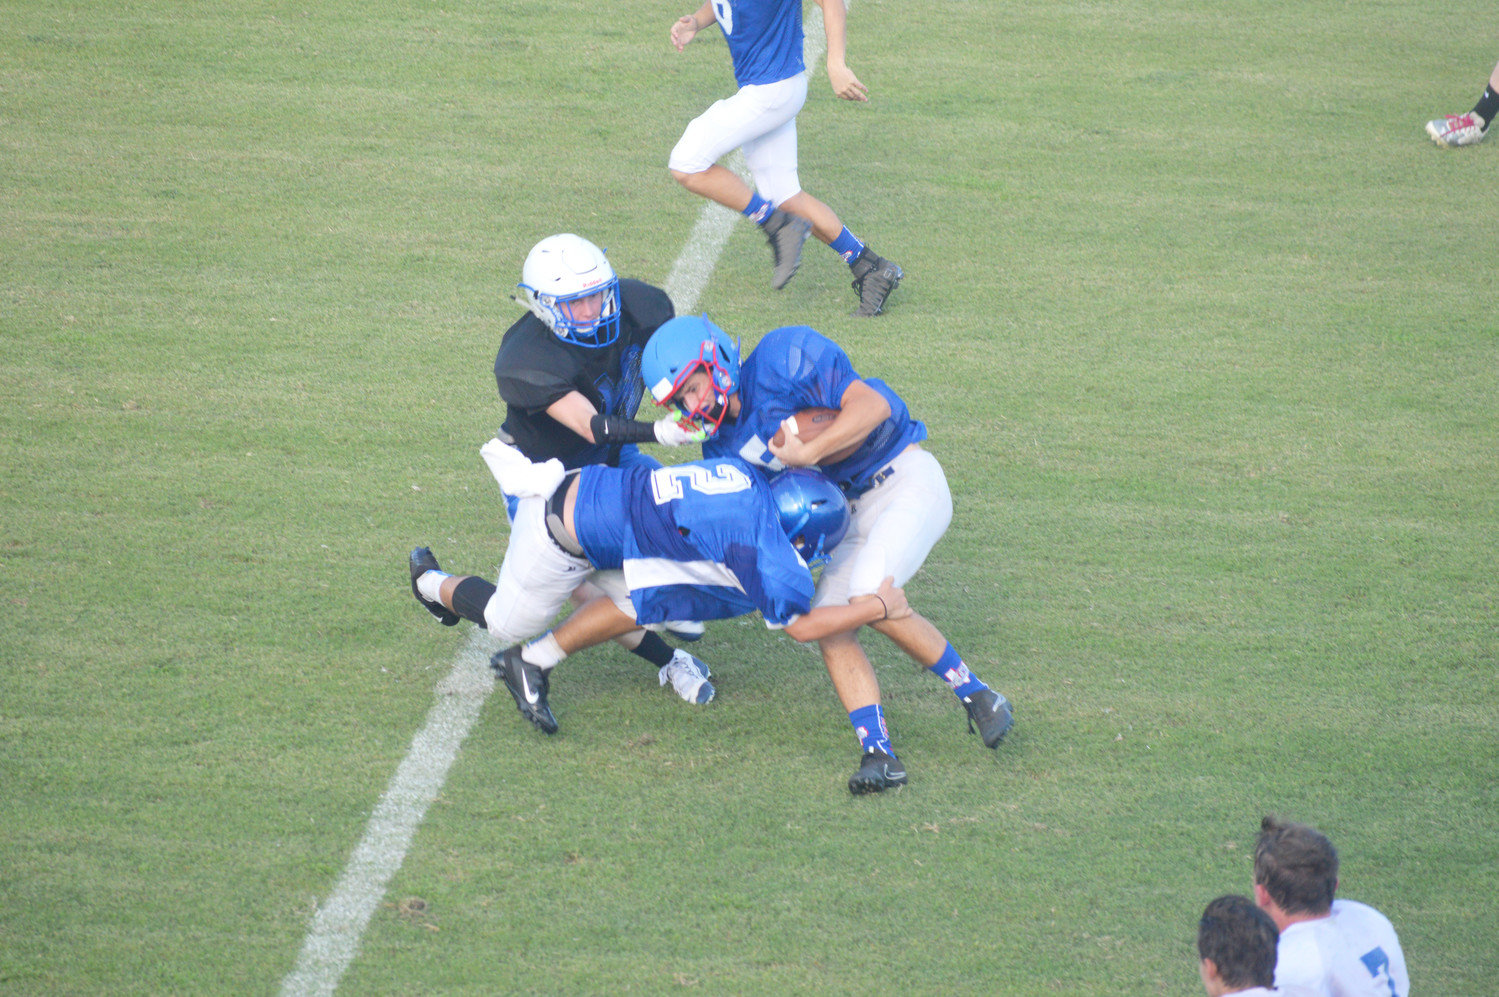 Josh Medlin (5) is brought down by a pair of Hawkins Hawks in Thursday’s scrimmage.